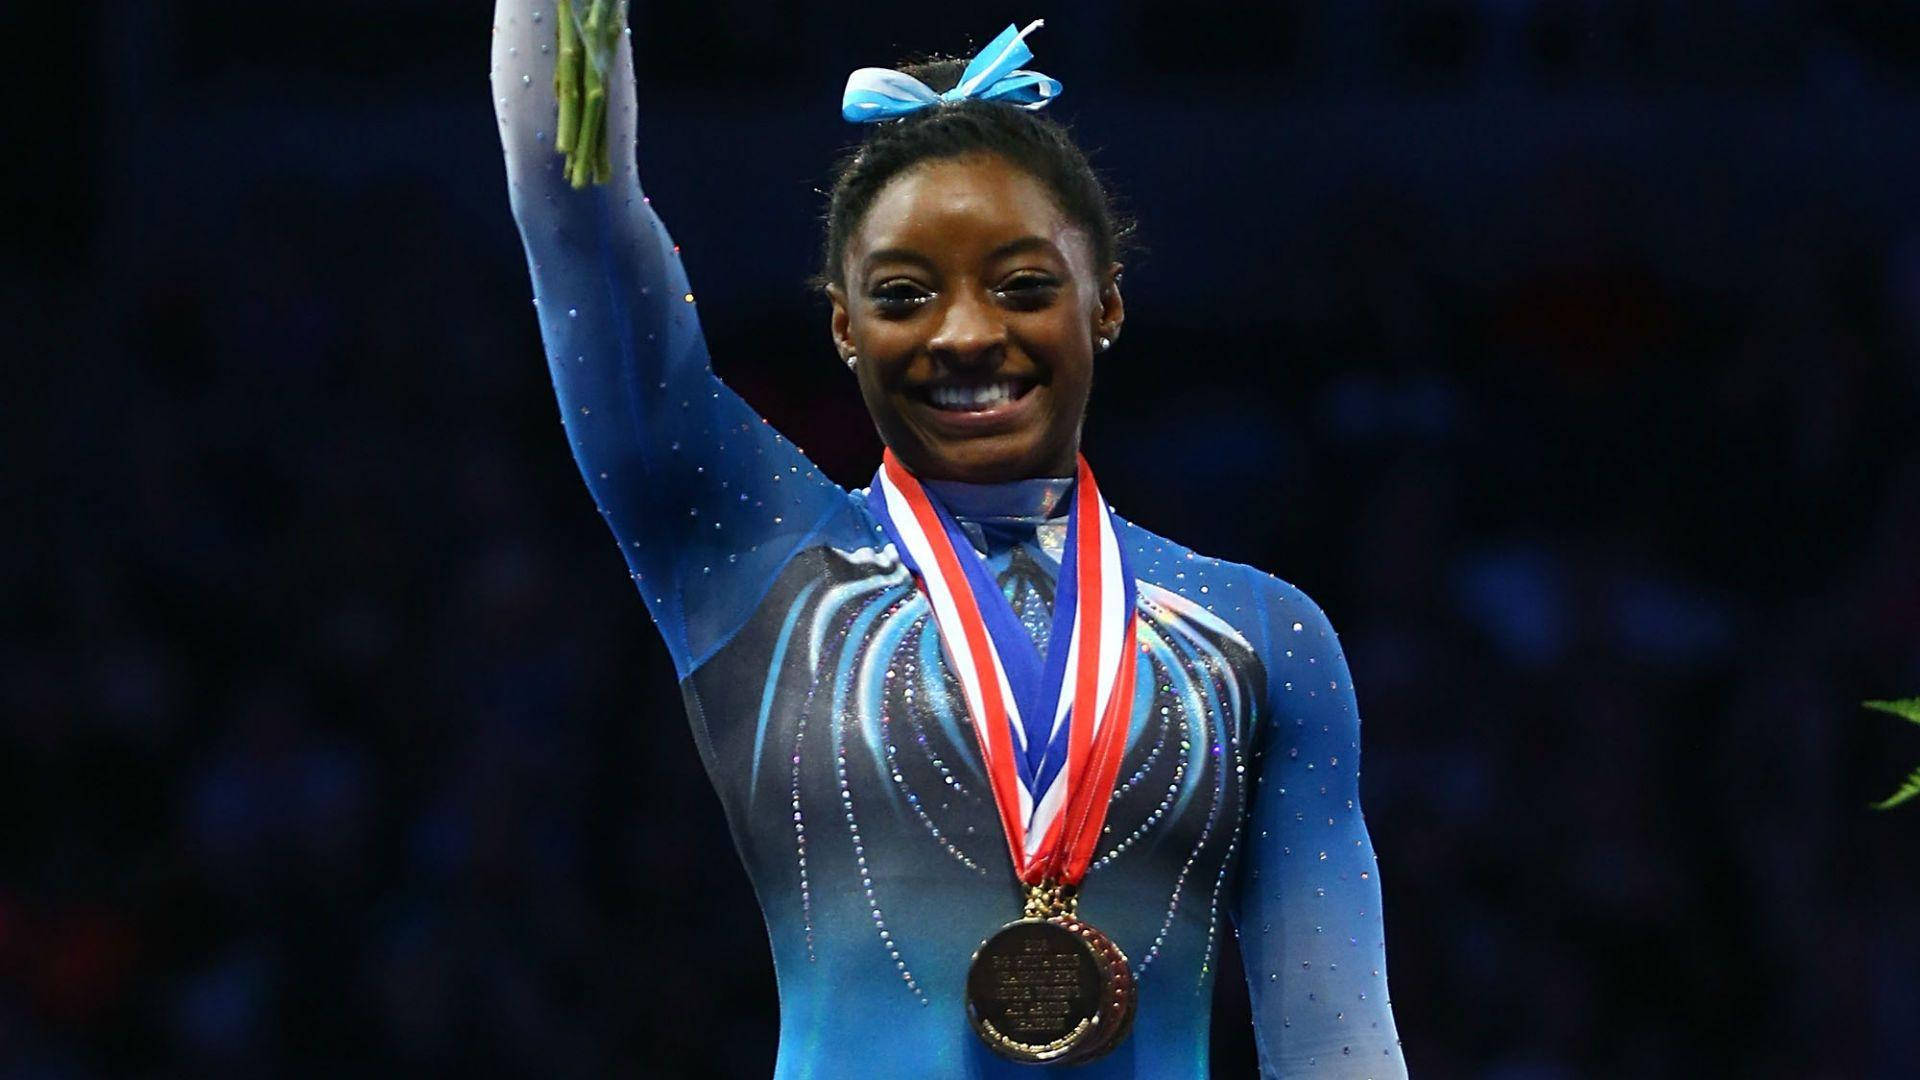 Olympic Gold Medal Gymnast Simone Biles Flawlessly Executing Her Routine Wallpaper